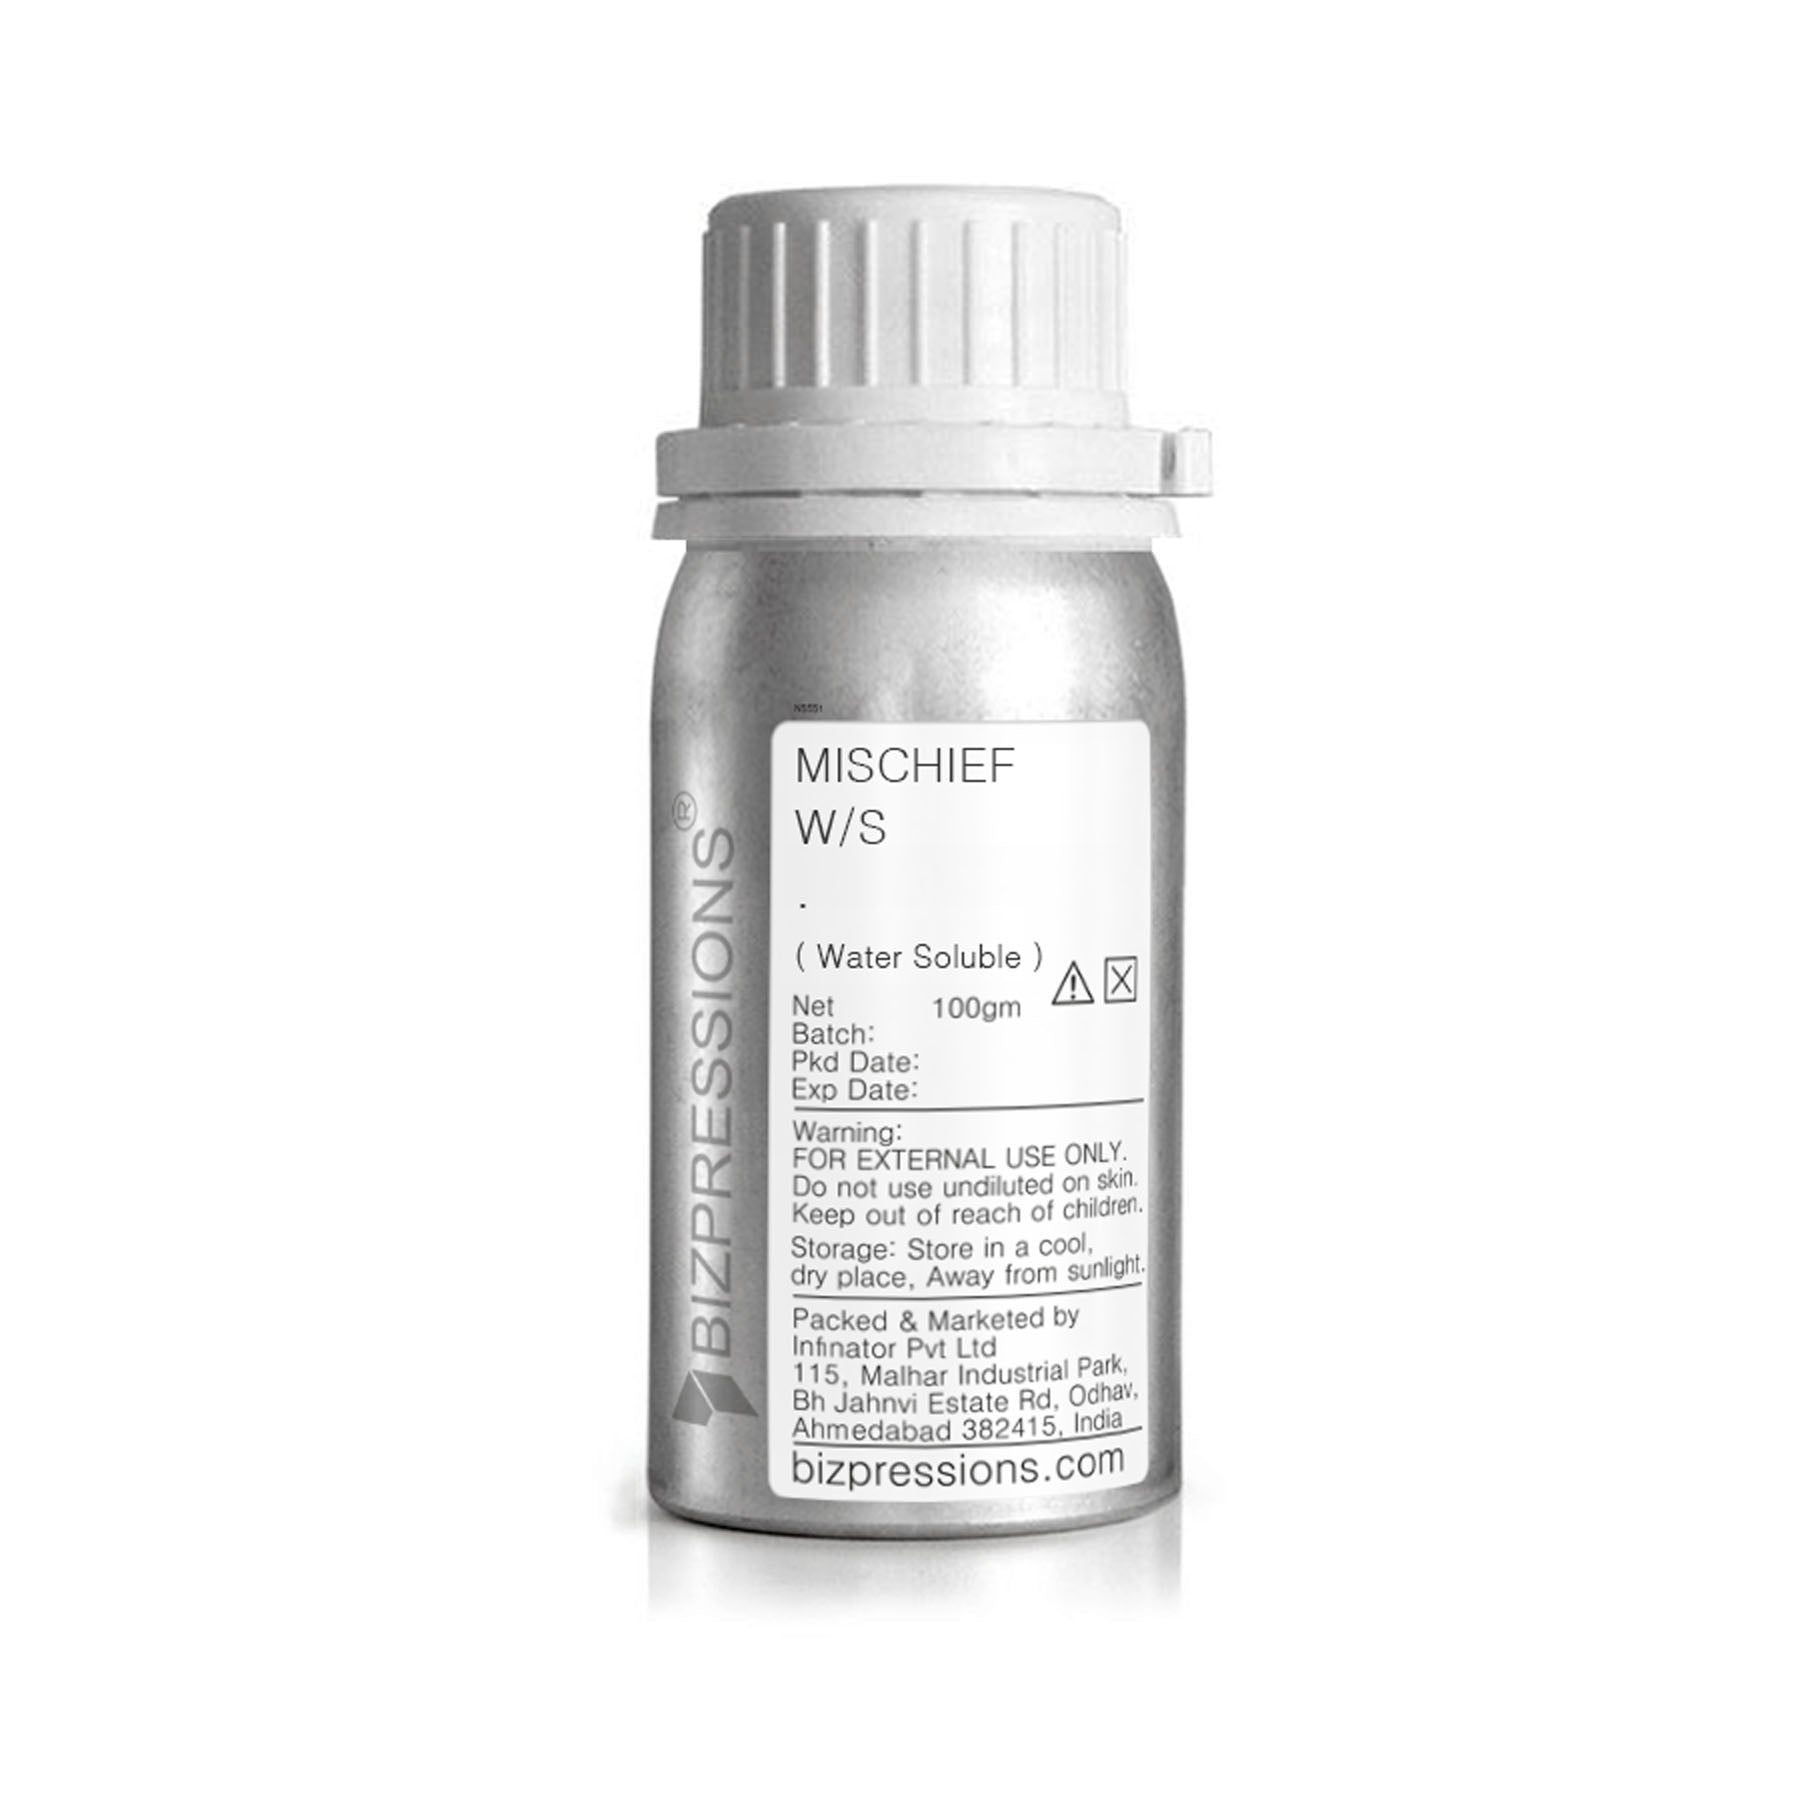 MISCHIEF W/S - Fragrance ( Water Soluble ) - 100 gm